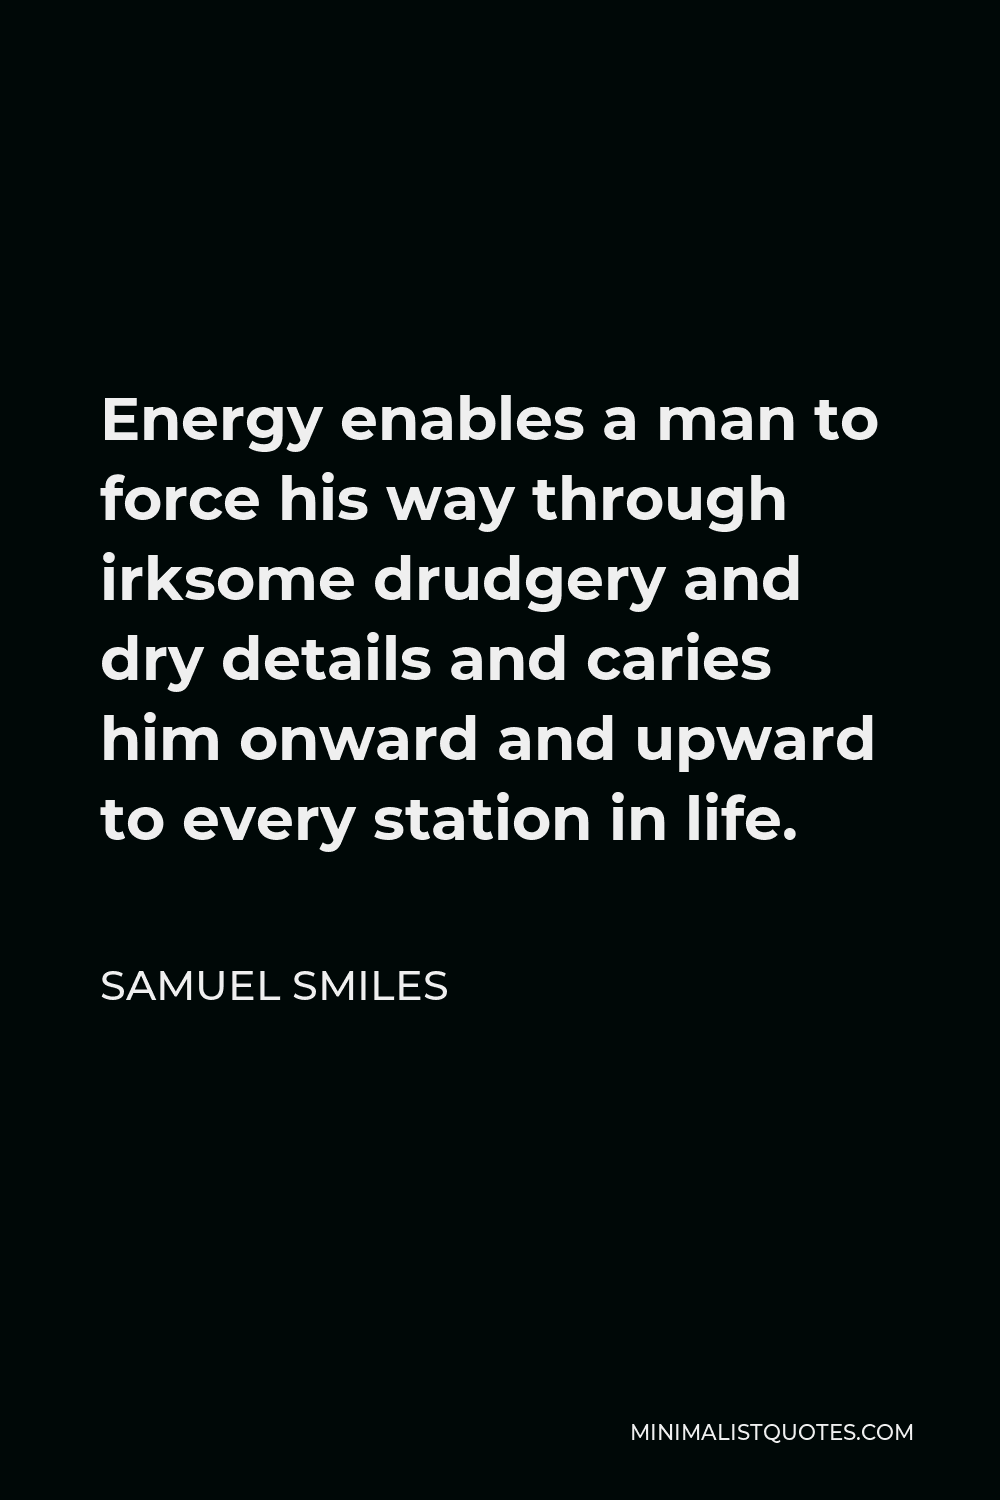 Samuel Smiles Quote - Energy enables a man to force his way through irksome drudgery and dry details and caries him onward and upward to every station in life.